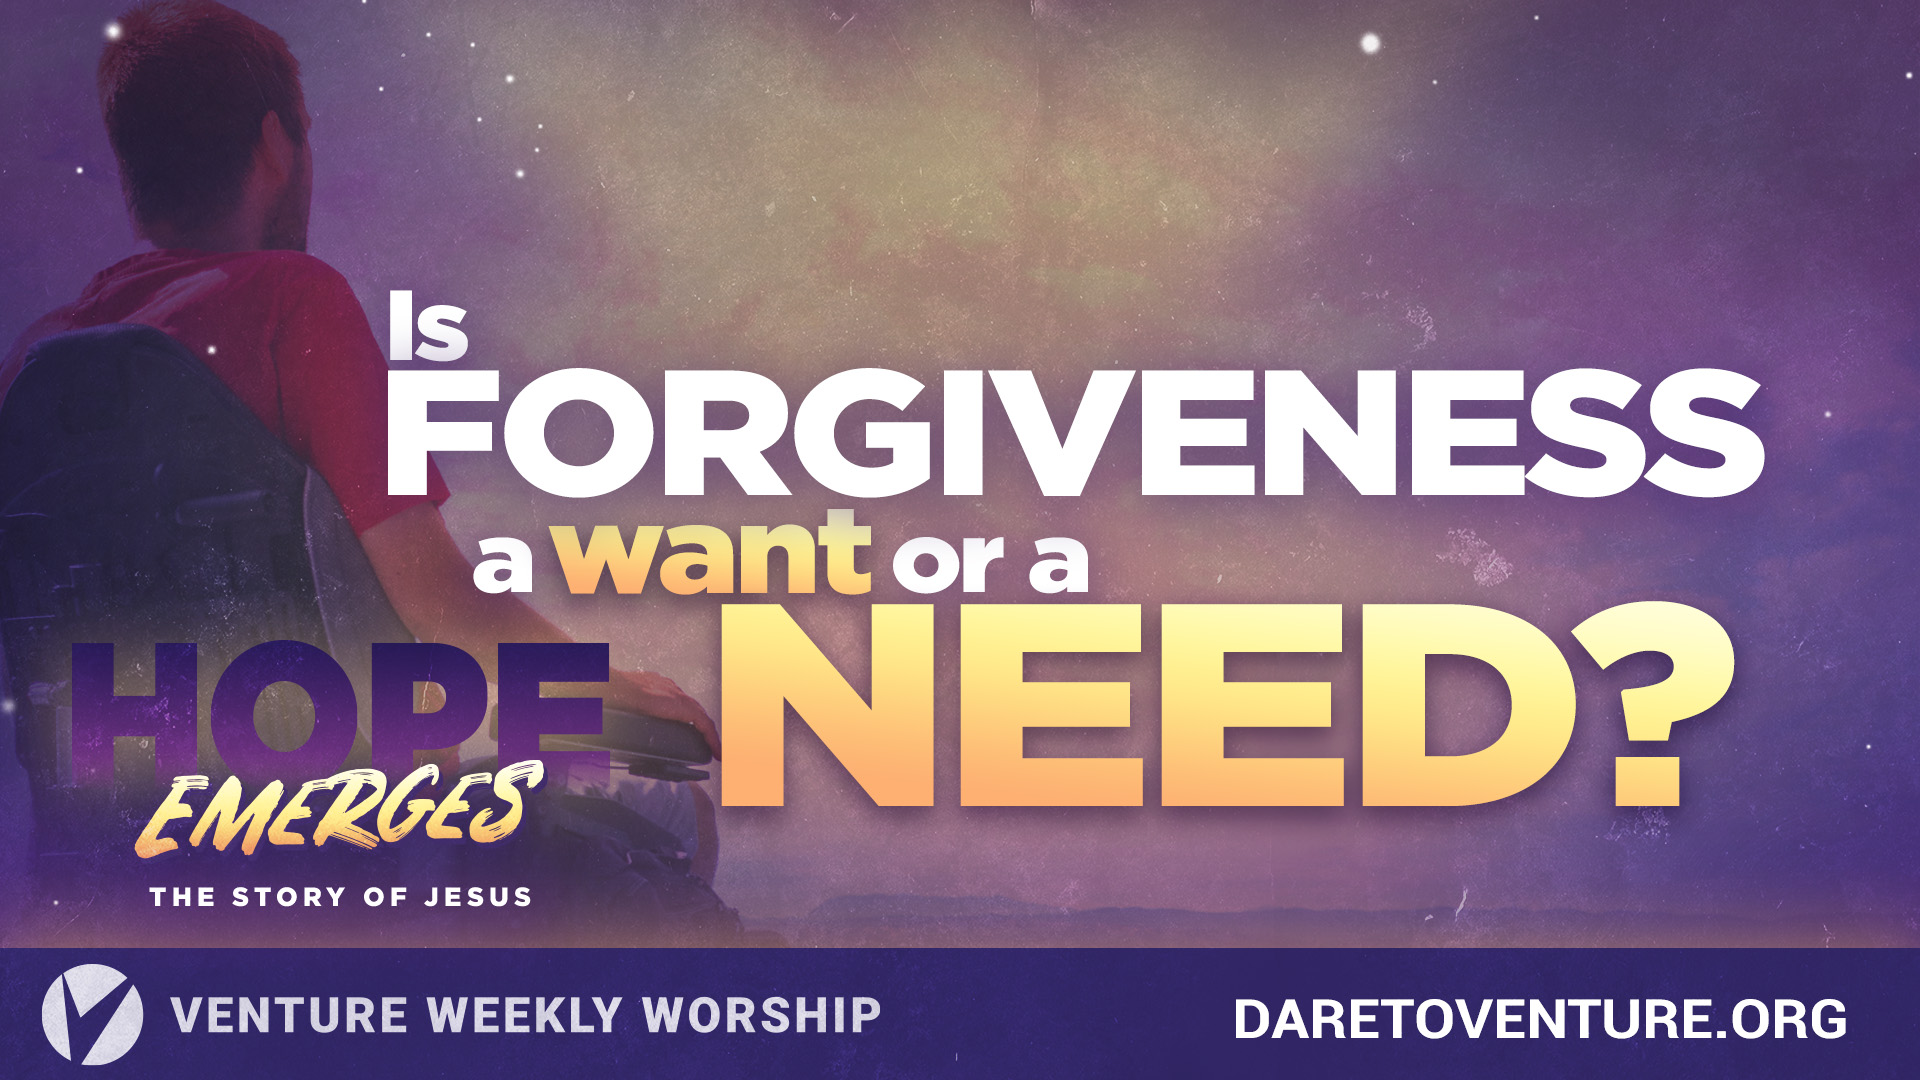 Hope Emerges: Is Forgiveness a Want or a Need?